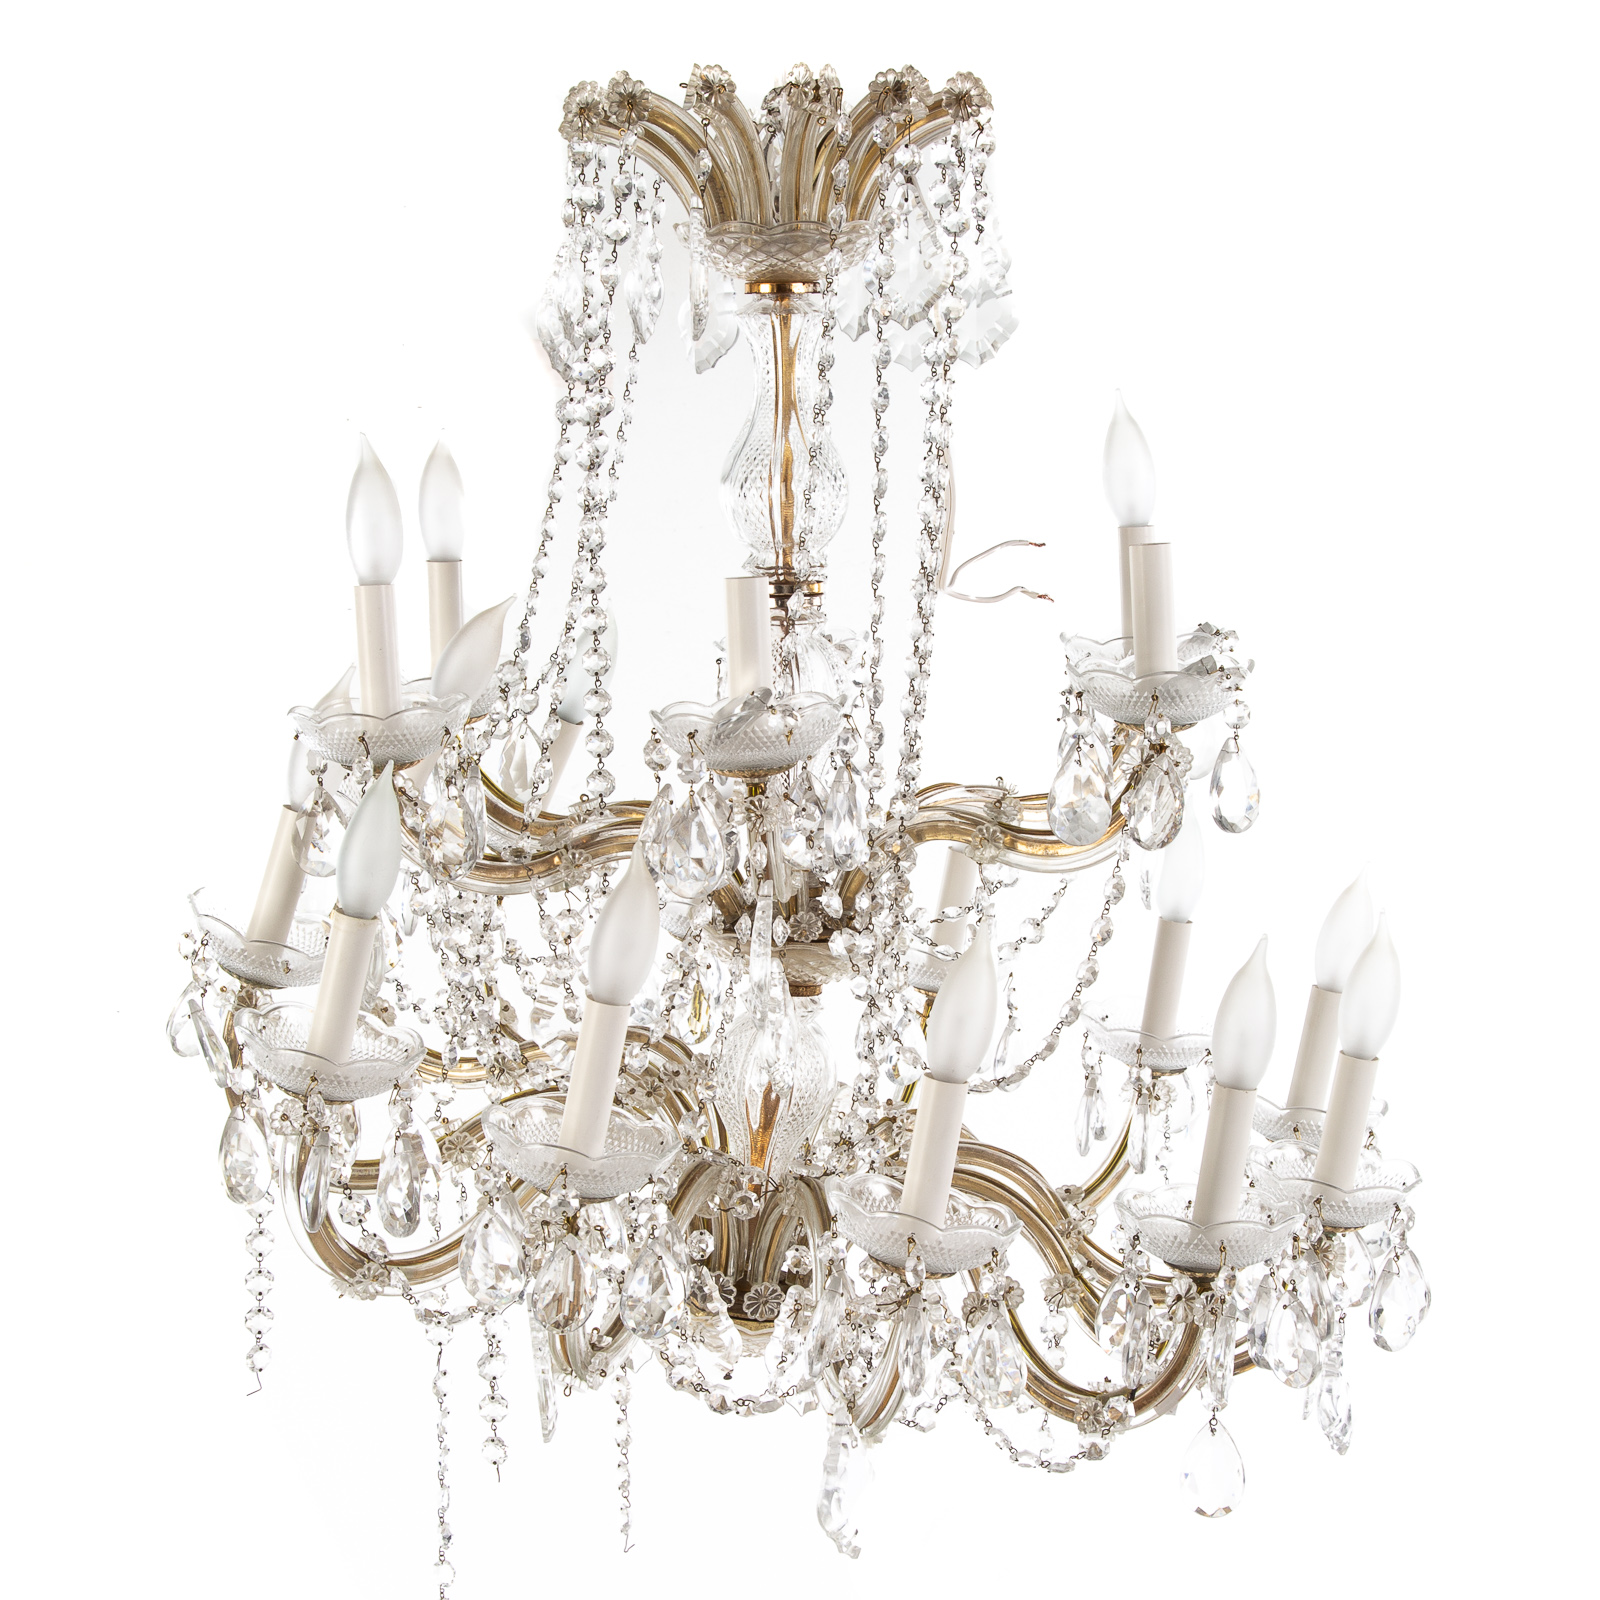 CONTINENTAL GLASS CHANDELIER 20th